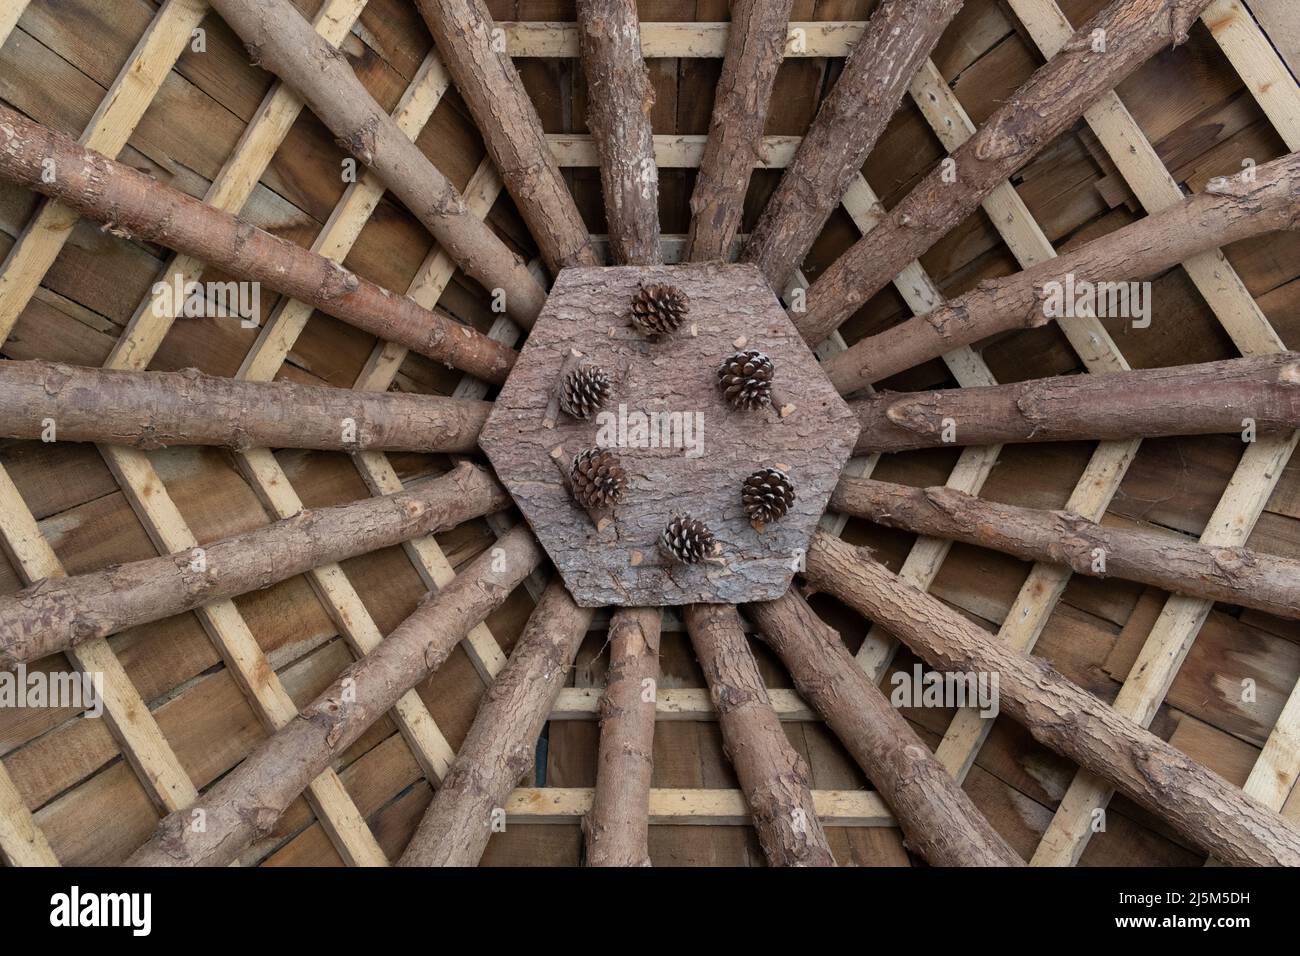 Looking up at the roof of the wooden summer house at Allen Banks, Northumberland, UK, in natural light, due to being a structure open on most sides. Stock Photo